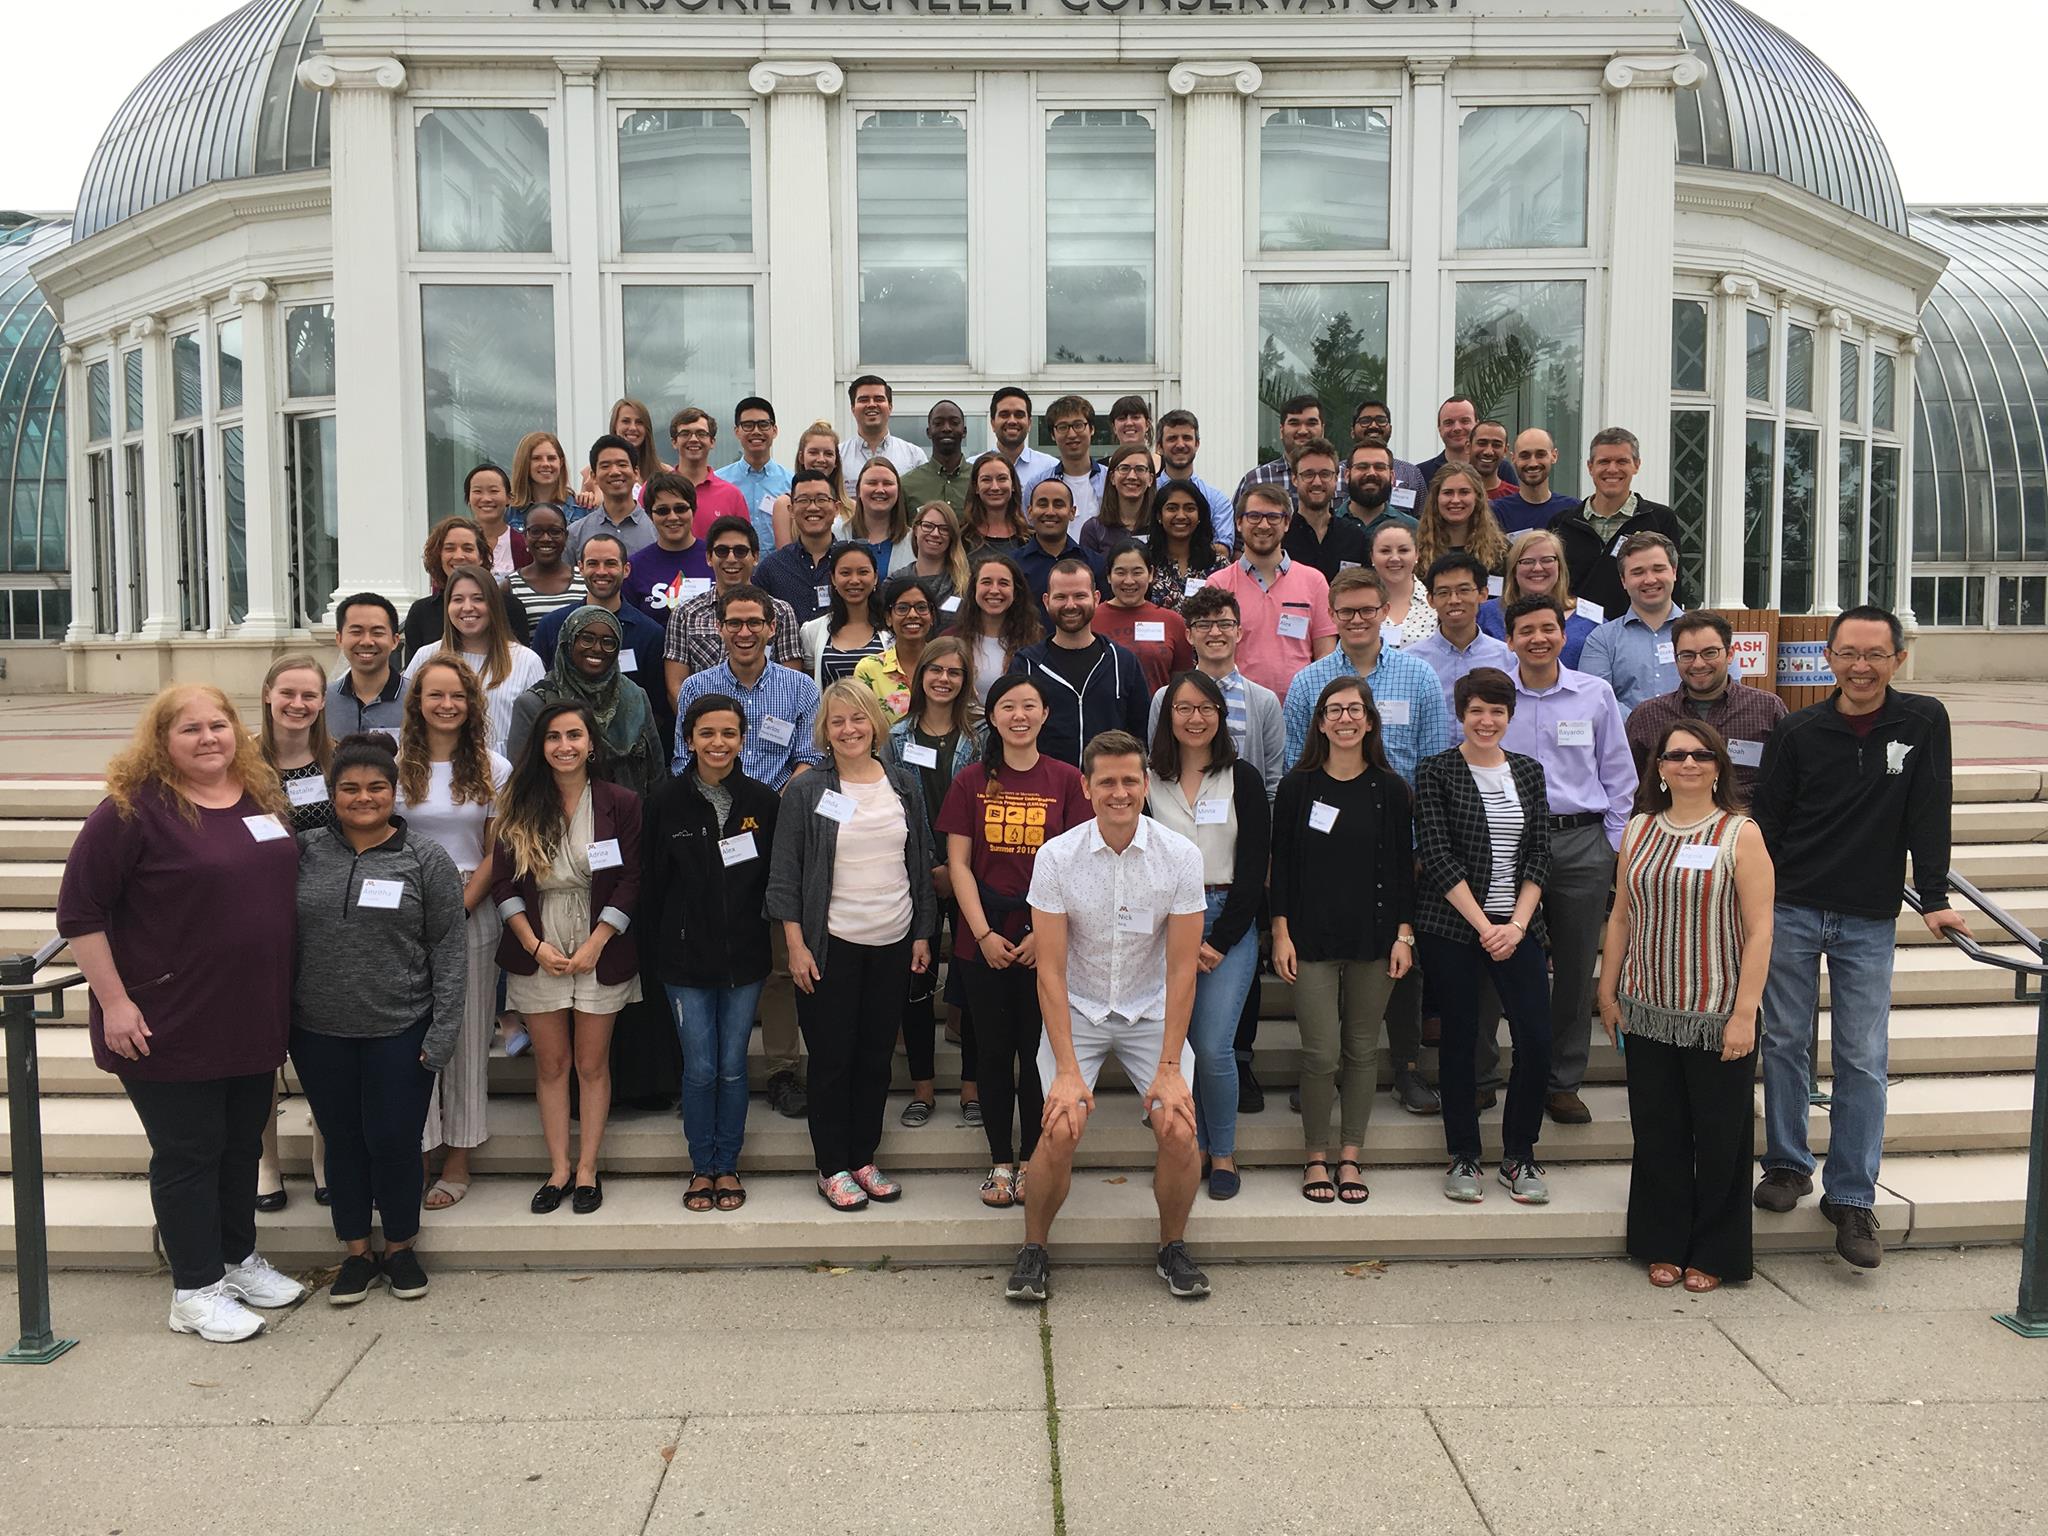 Group picture of UMN Medical Scientist Training Program 2018 retreat attendees